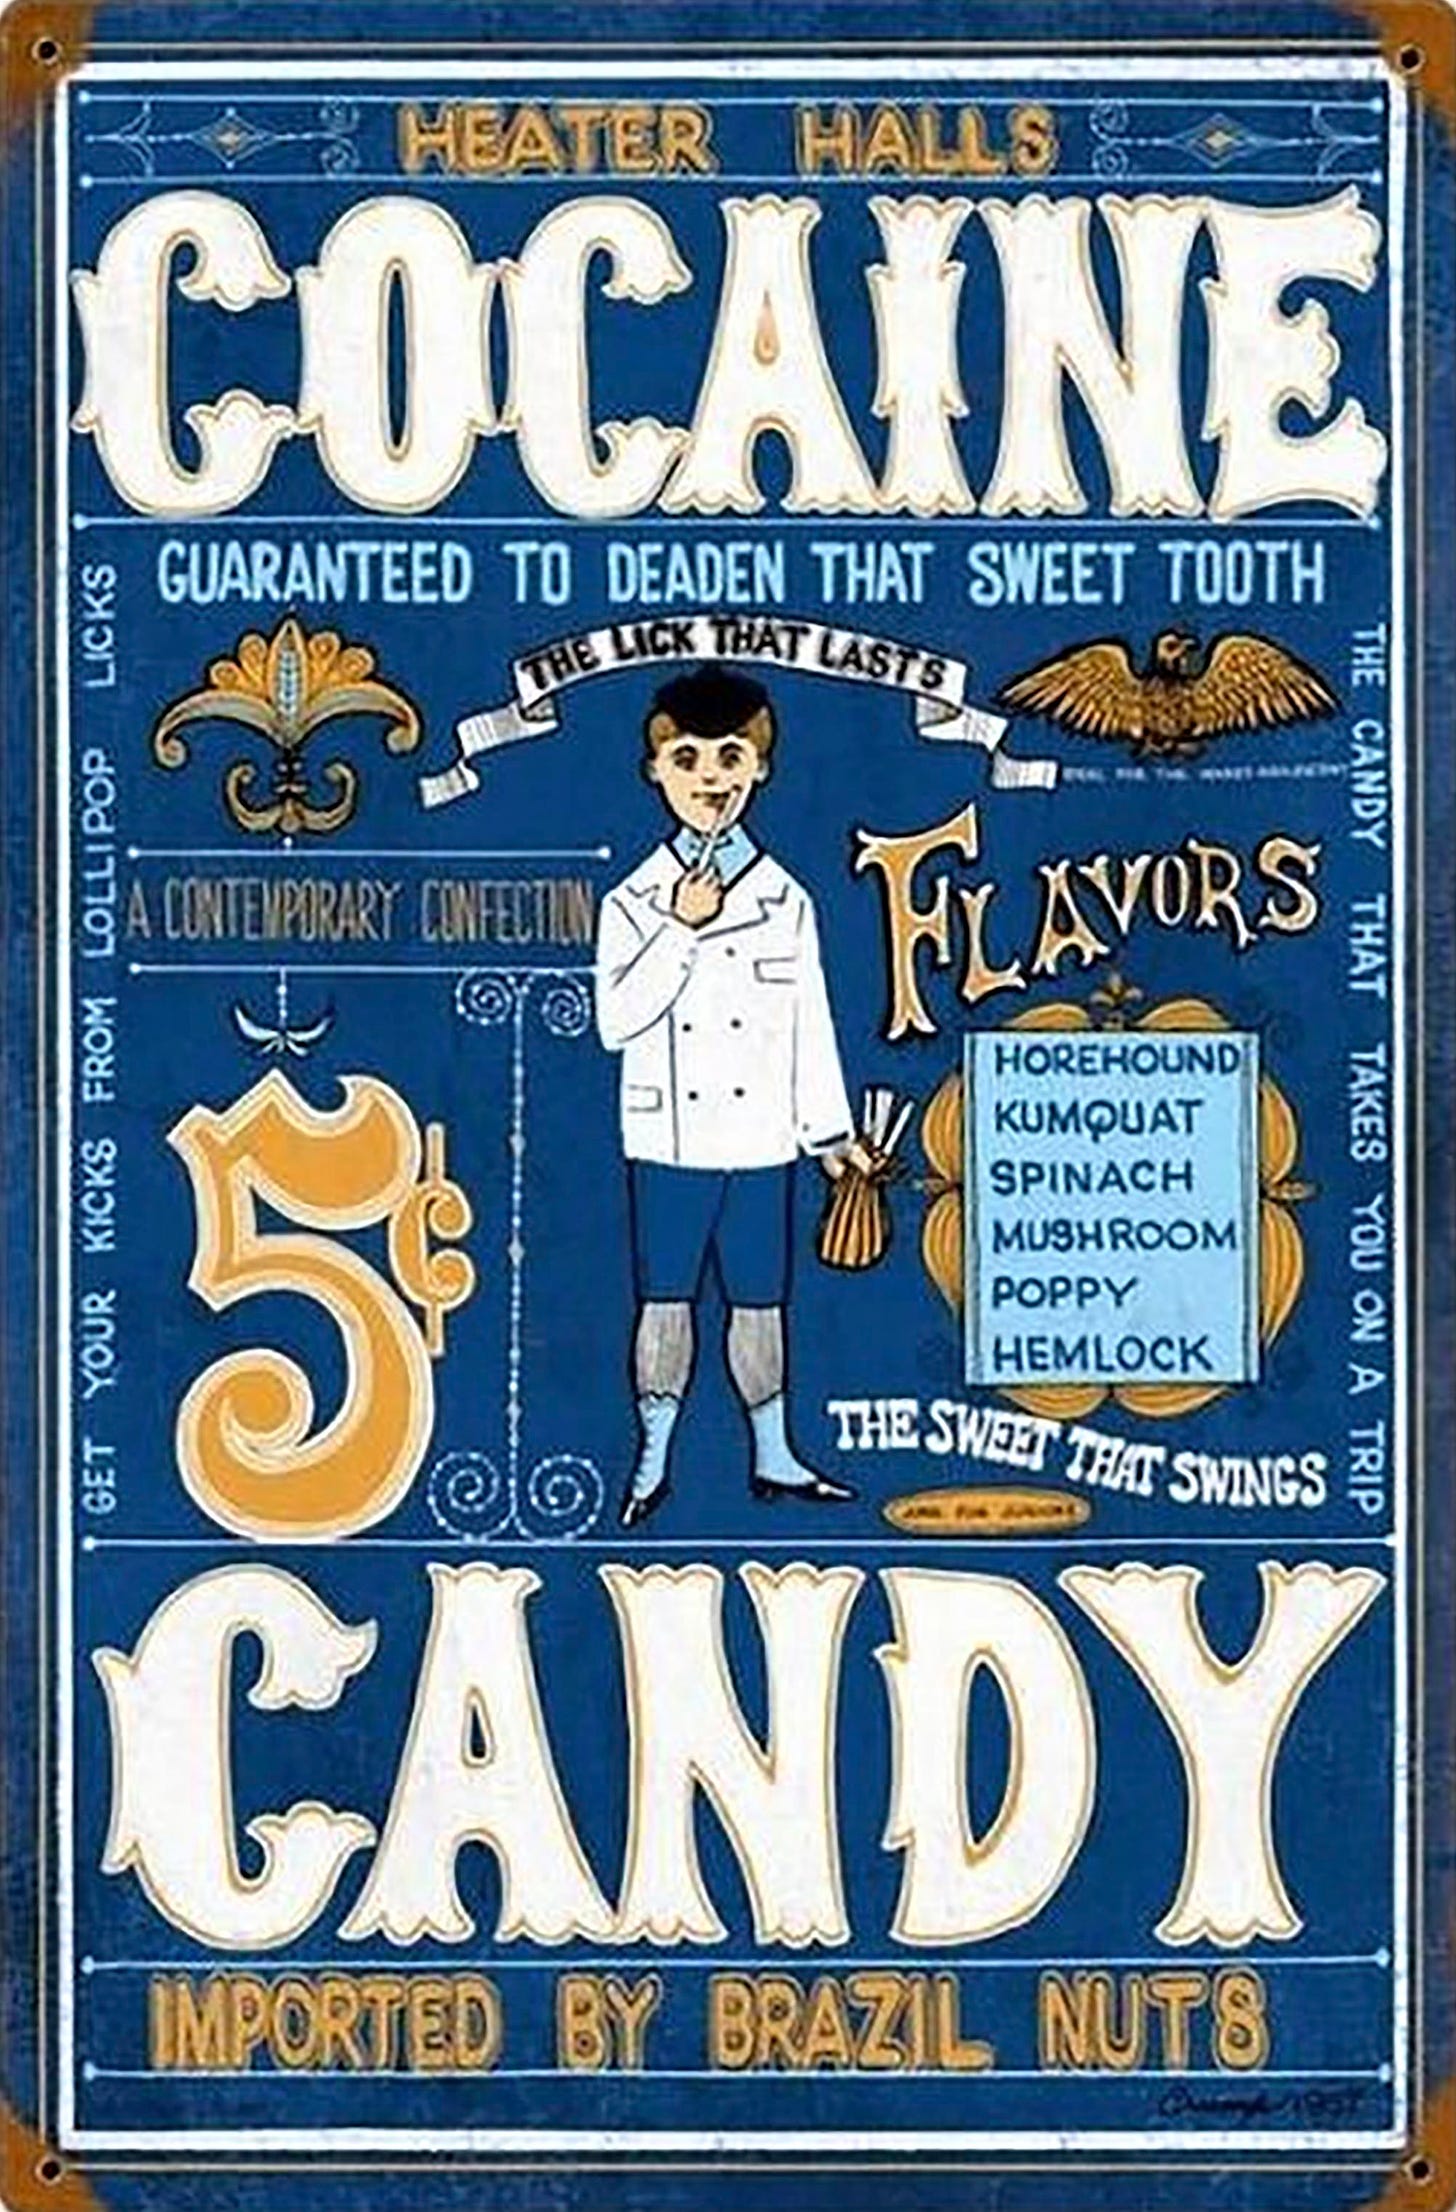 An advertisement for "cocaine candy" marketed towards kids.